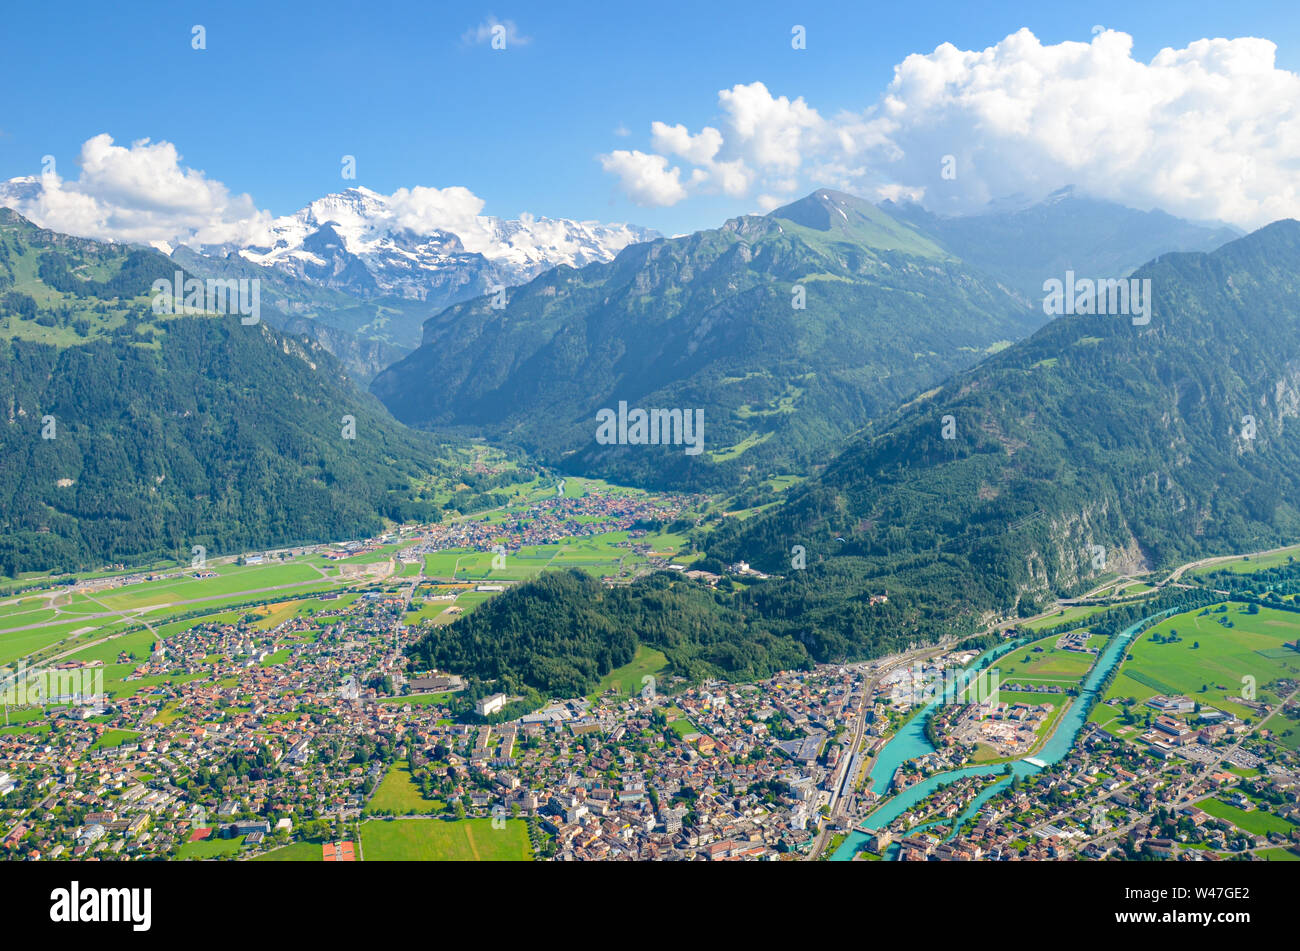 Amazing view of Interlaken and adjacent mountains photographed from the top of Harder Kulm, Switzerland. Swiss Alps. Beautiful landscapes. Amazing landscape. Jungfrau, river. Stock Photo